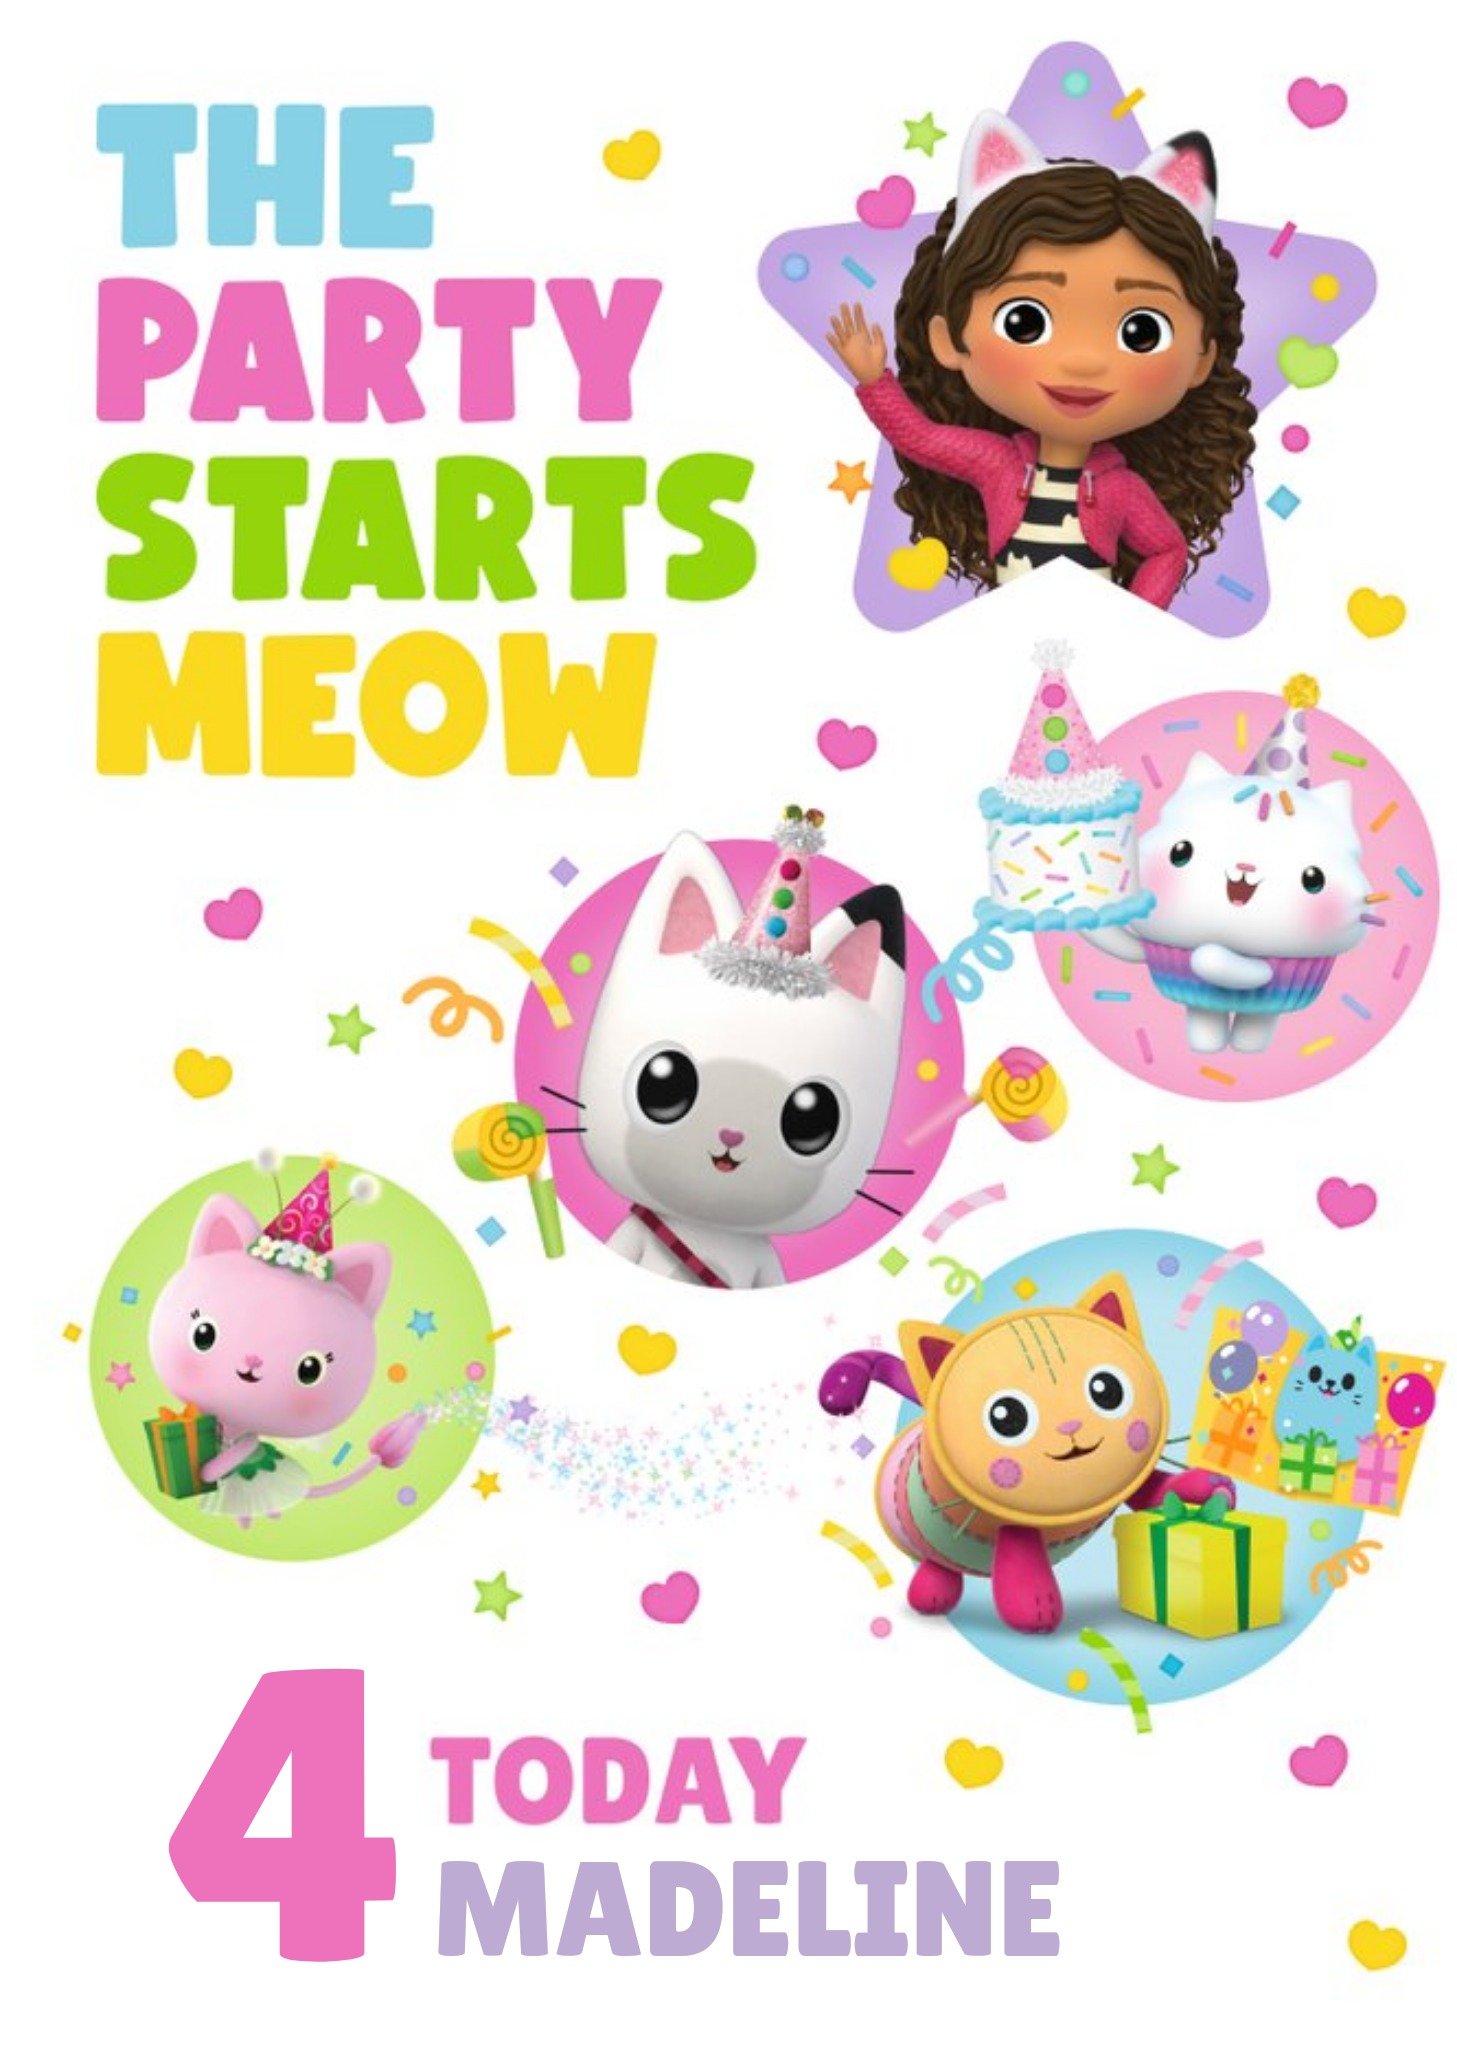 Moonpig Gally's Dollhouse The Party Starts Meow Personalise Age Birthday Card Ecard